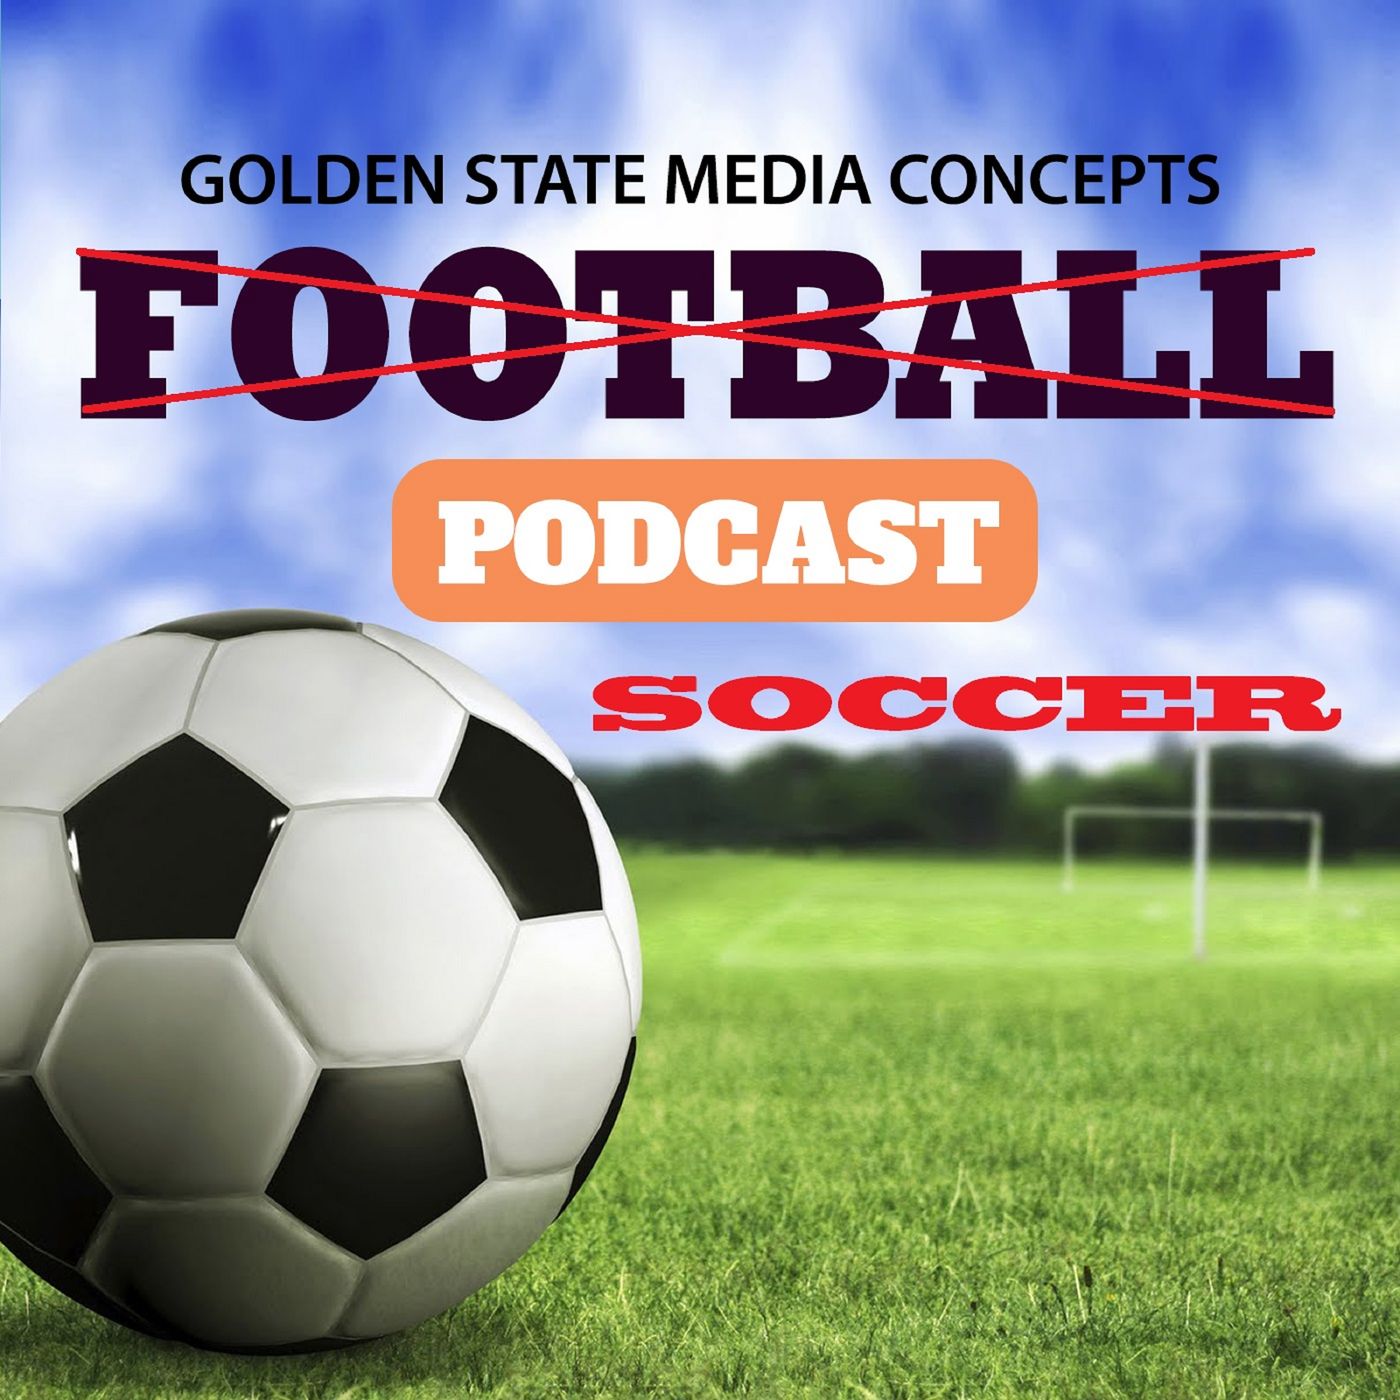 Soccer Spectrum: From Champions' Glory to Managerial Moves | The GSMC Soccer Podcast by GSMC Sports